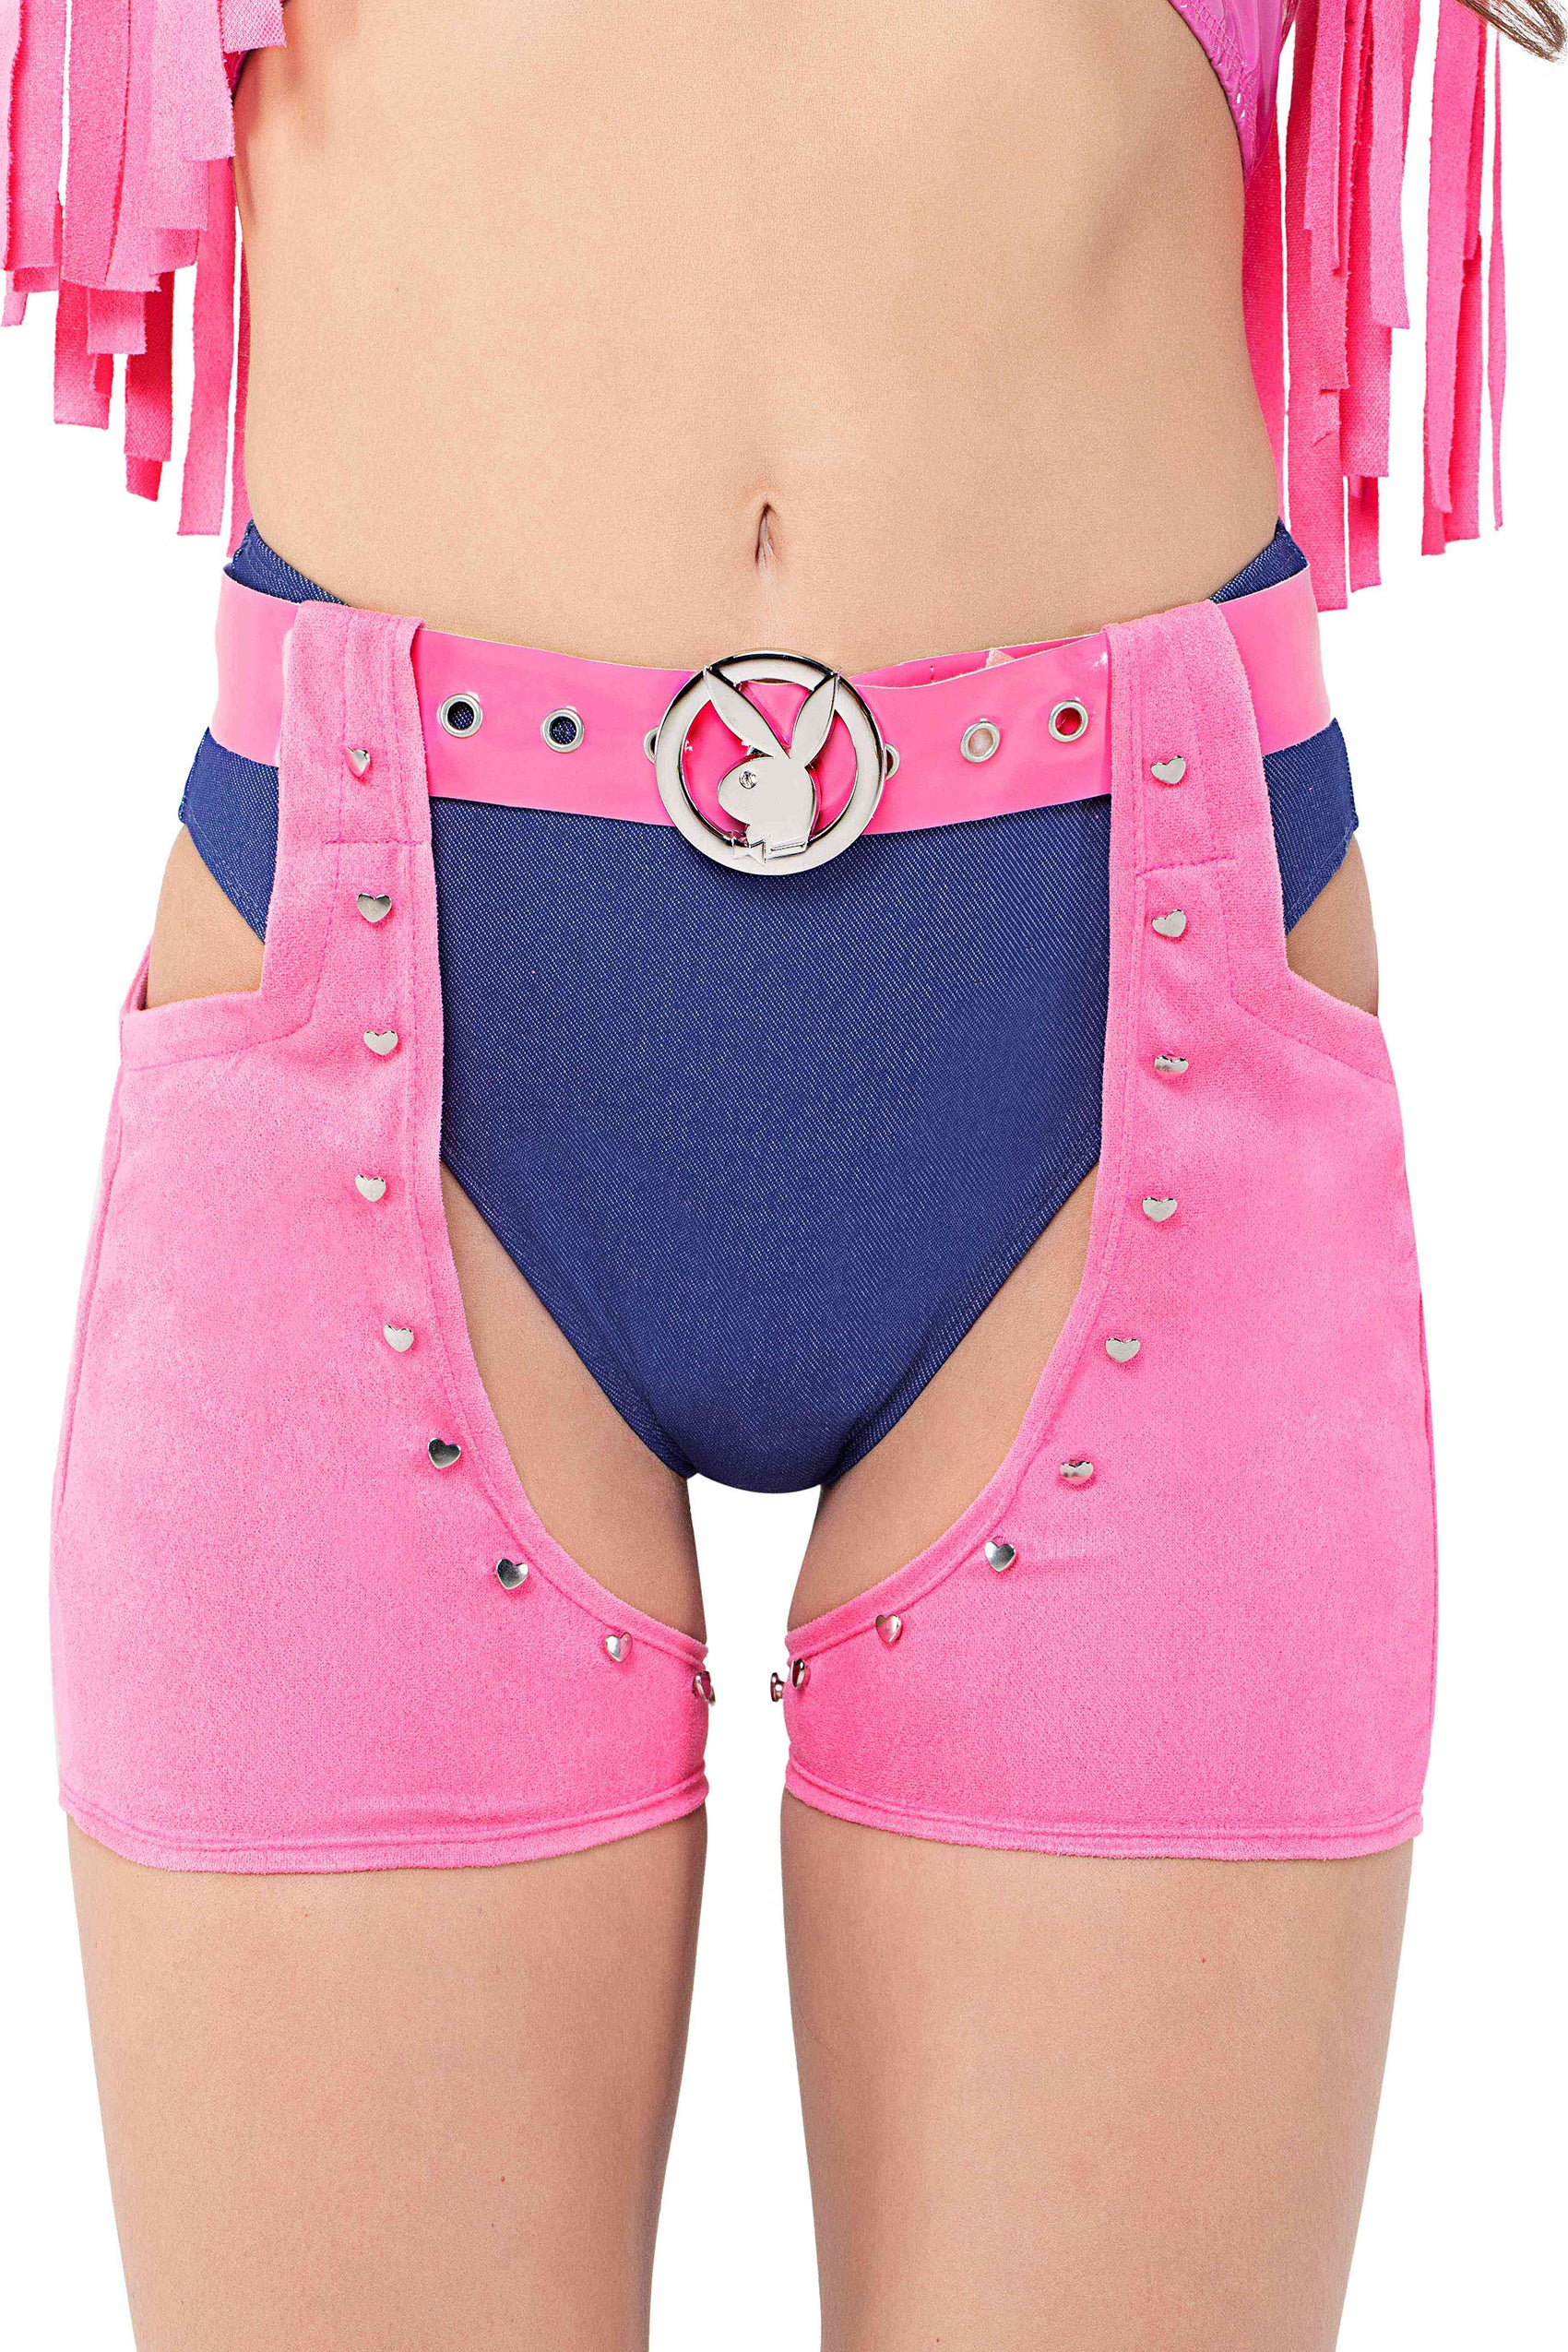 Barbie Style Playboy Cowgirl Costume by ROMA in Size S, M, L, or XL